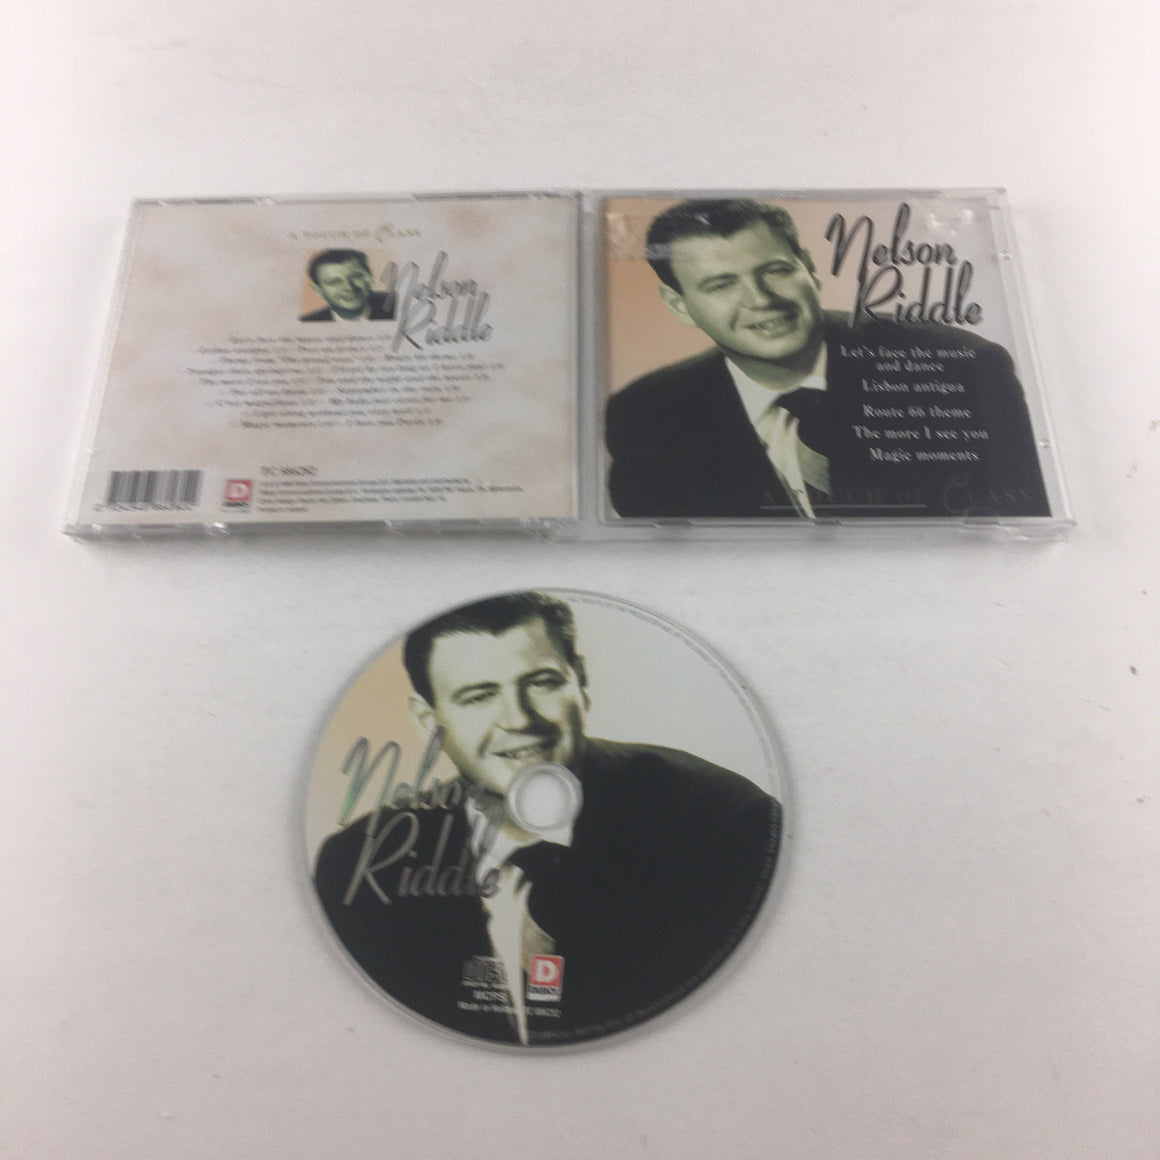 Nelson Riddle A Touch Of Class Used CD VG+\VG+